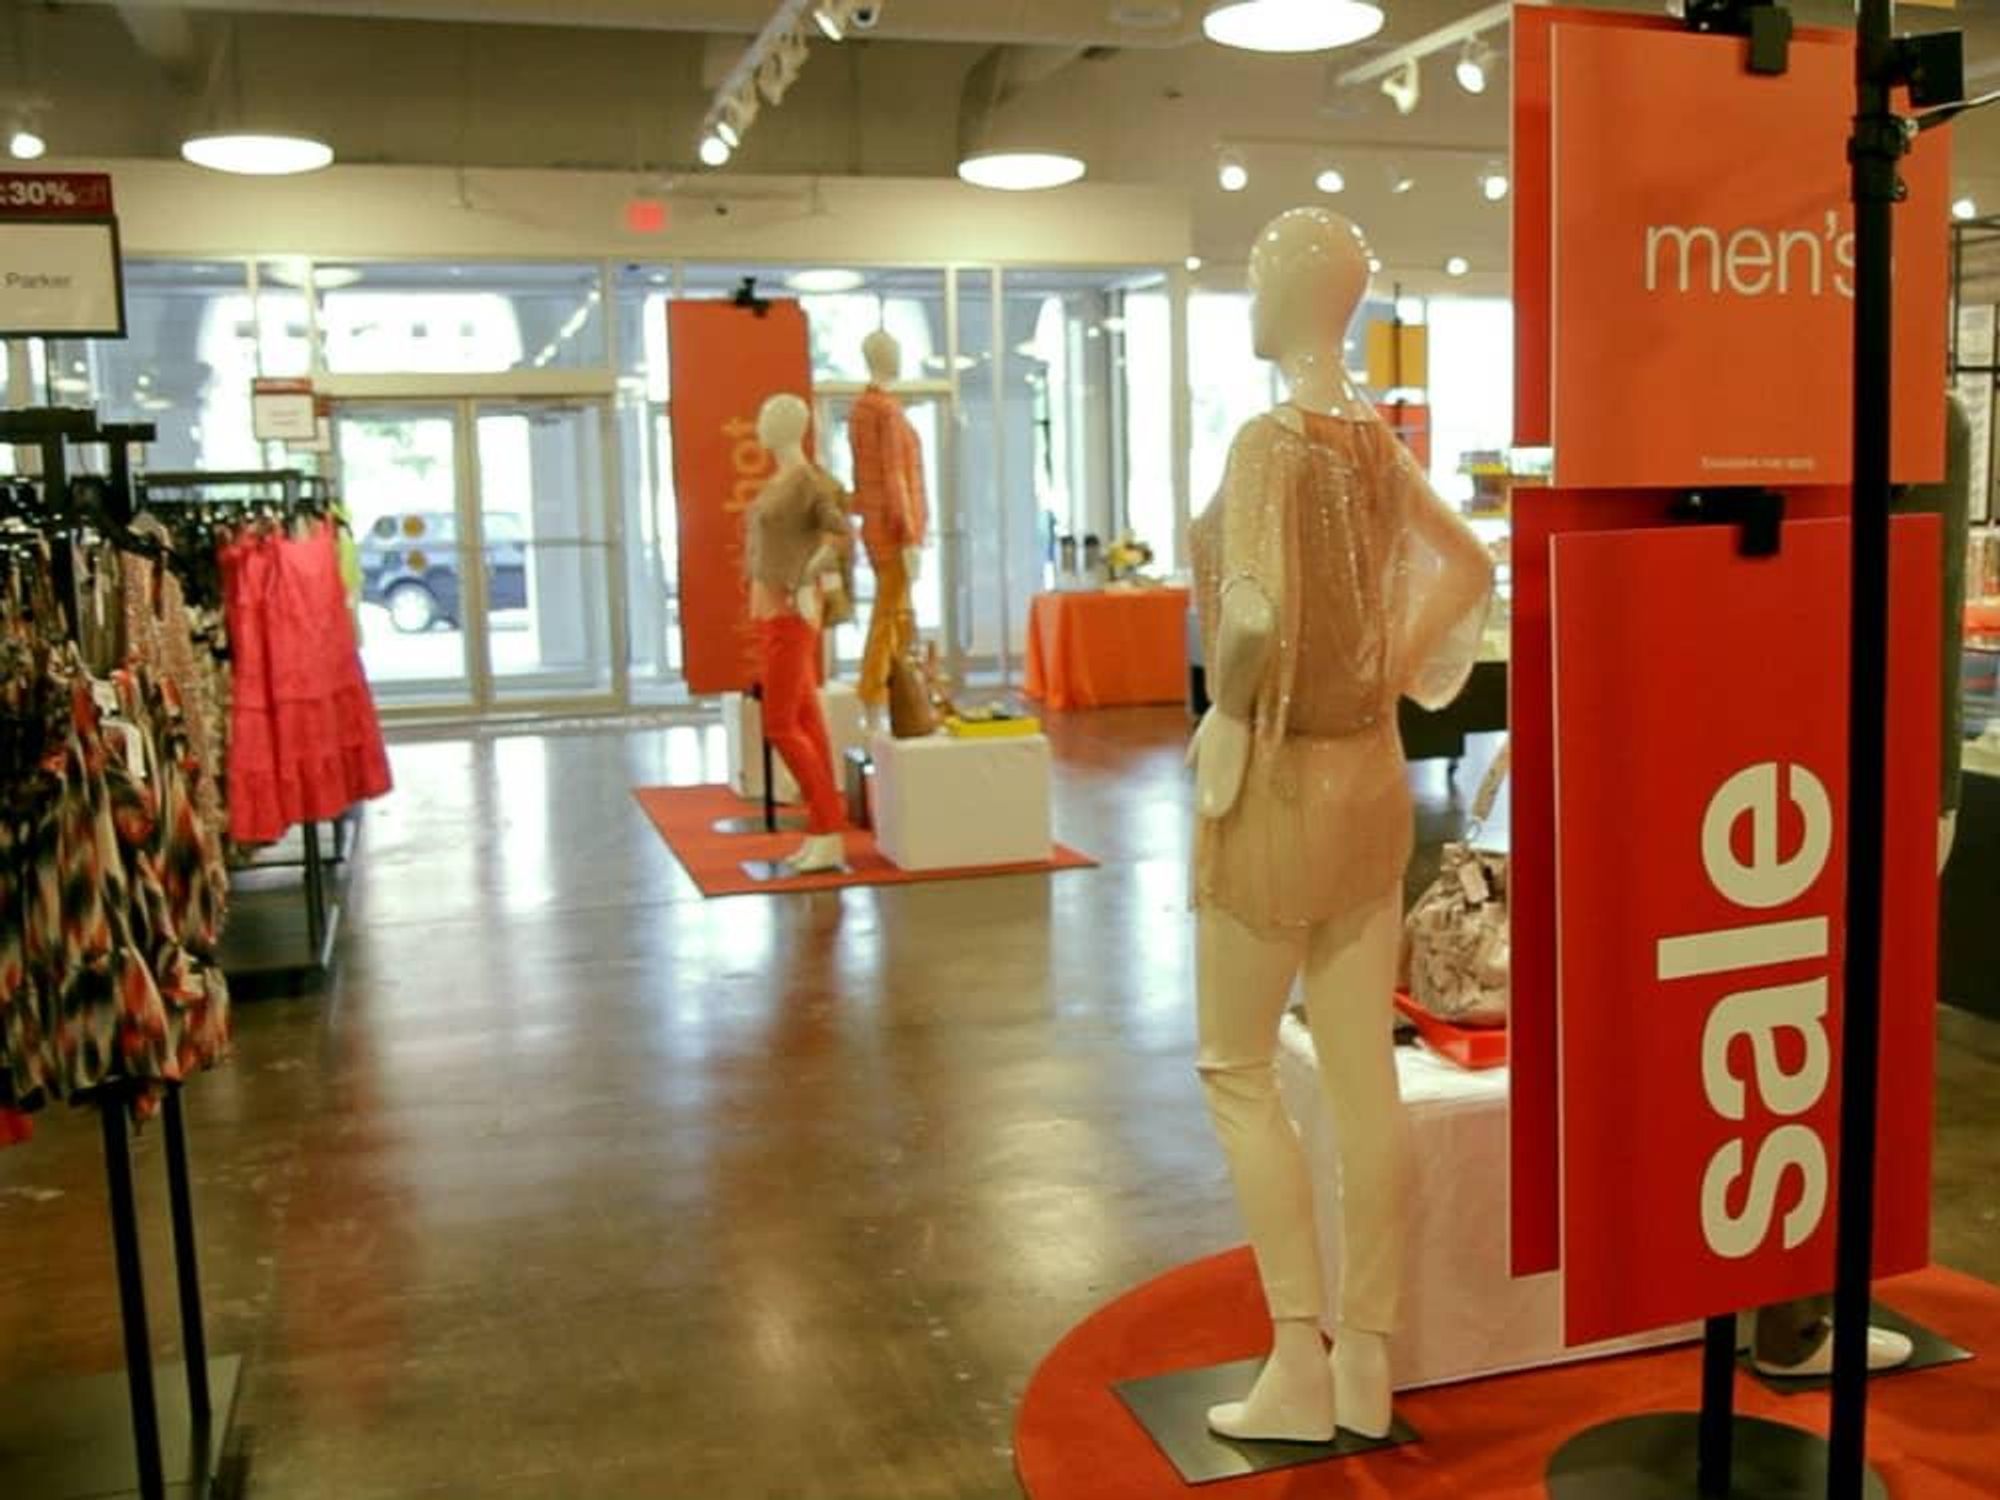 Neiman Marcus Redefines Off-Price Shopping with Last Call